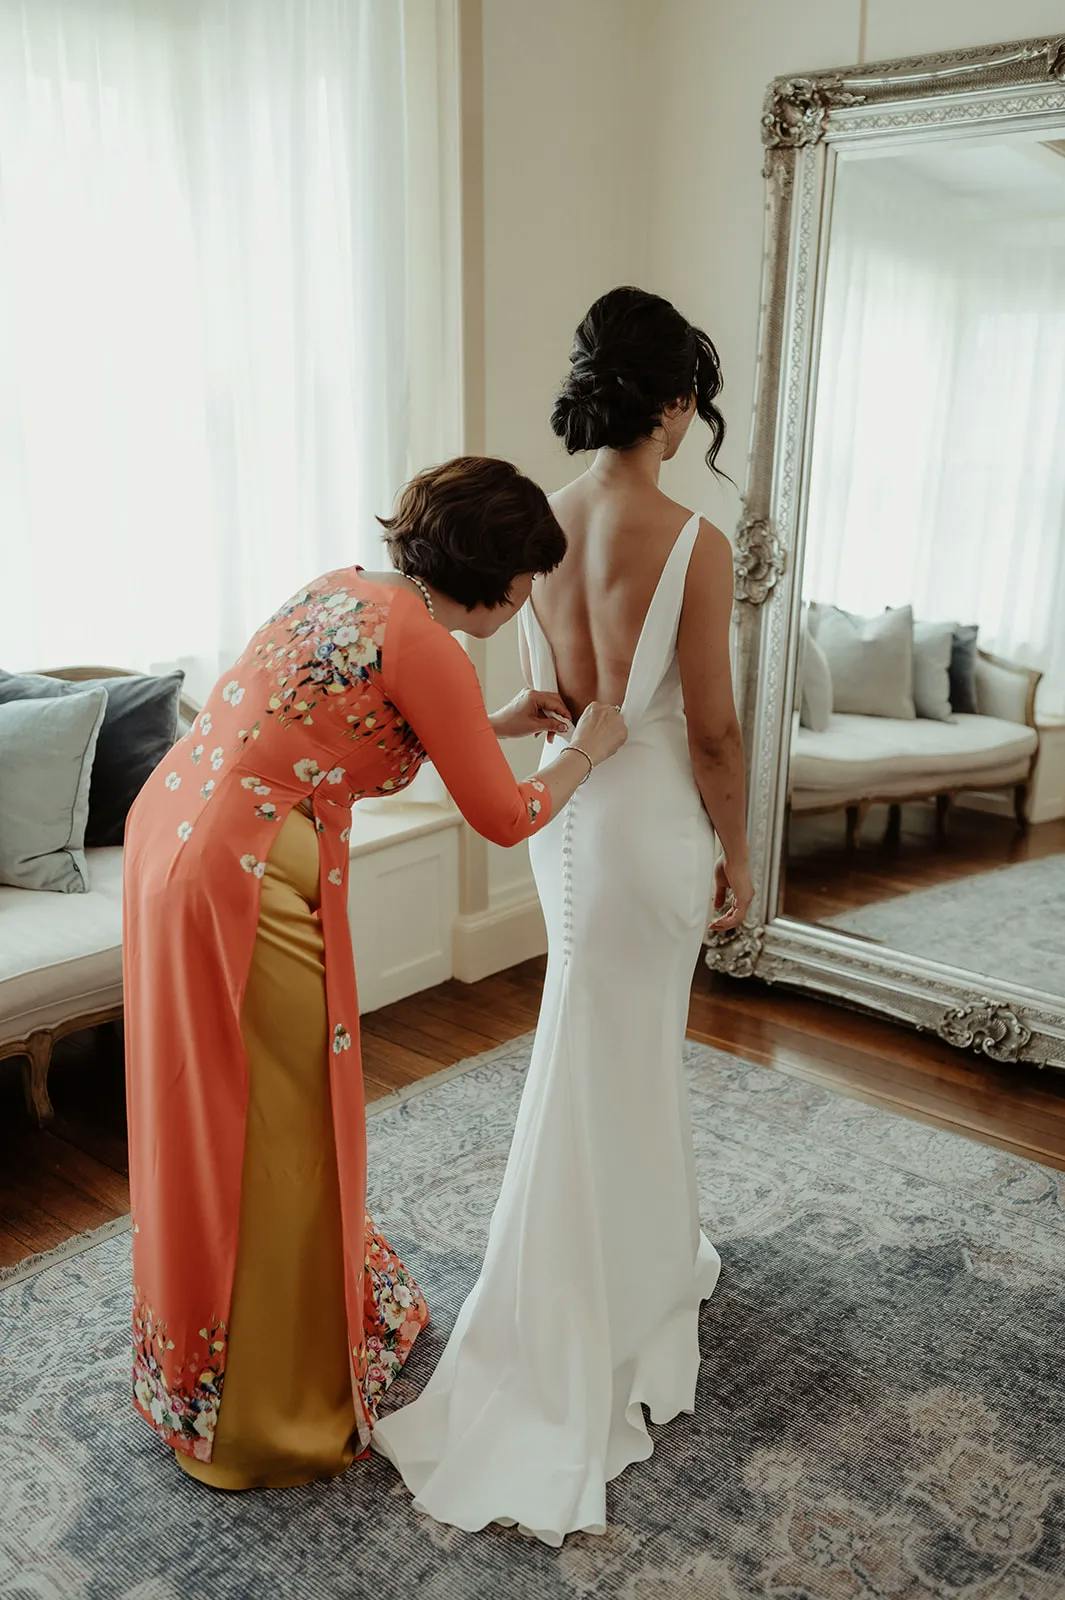 A woman in a white wedding dress stands in front of a full-length mirror while another woman, dressed in a floral-patterned reddish-orange and yellow gown, helps button up the back of the dress. The room has a cozy ambiance with sofas and soft natural light.